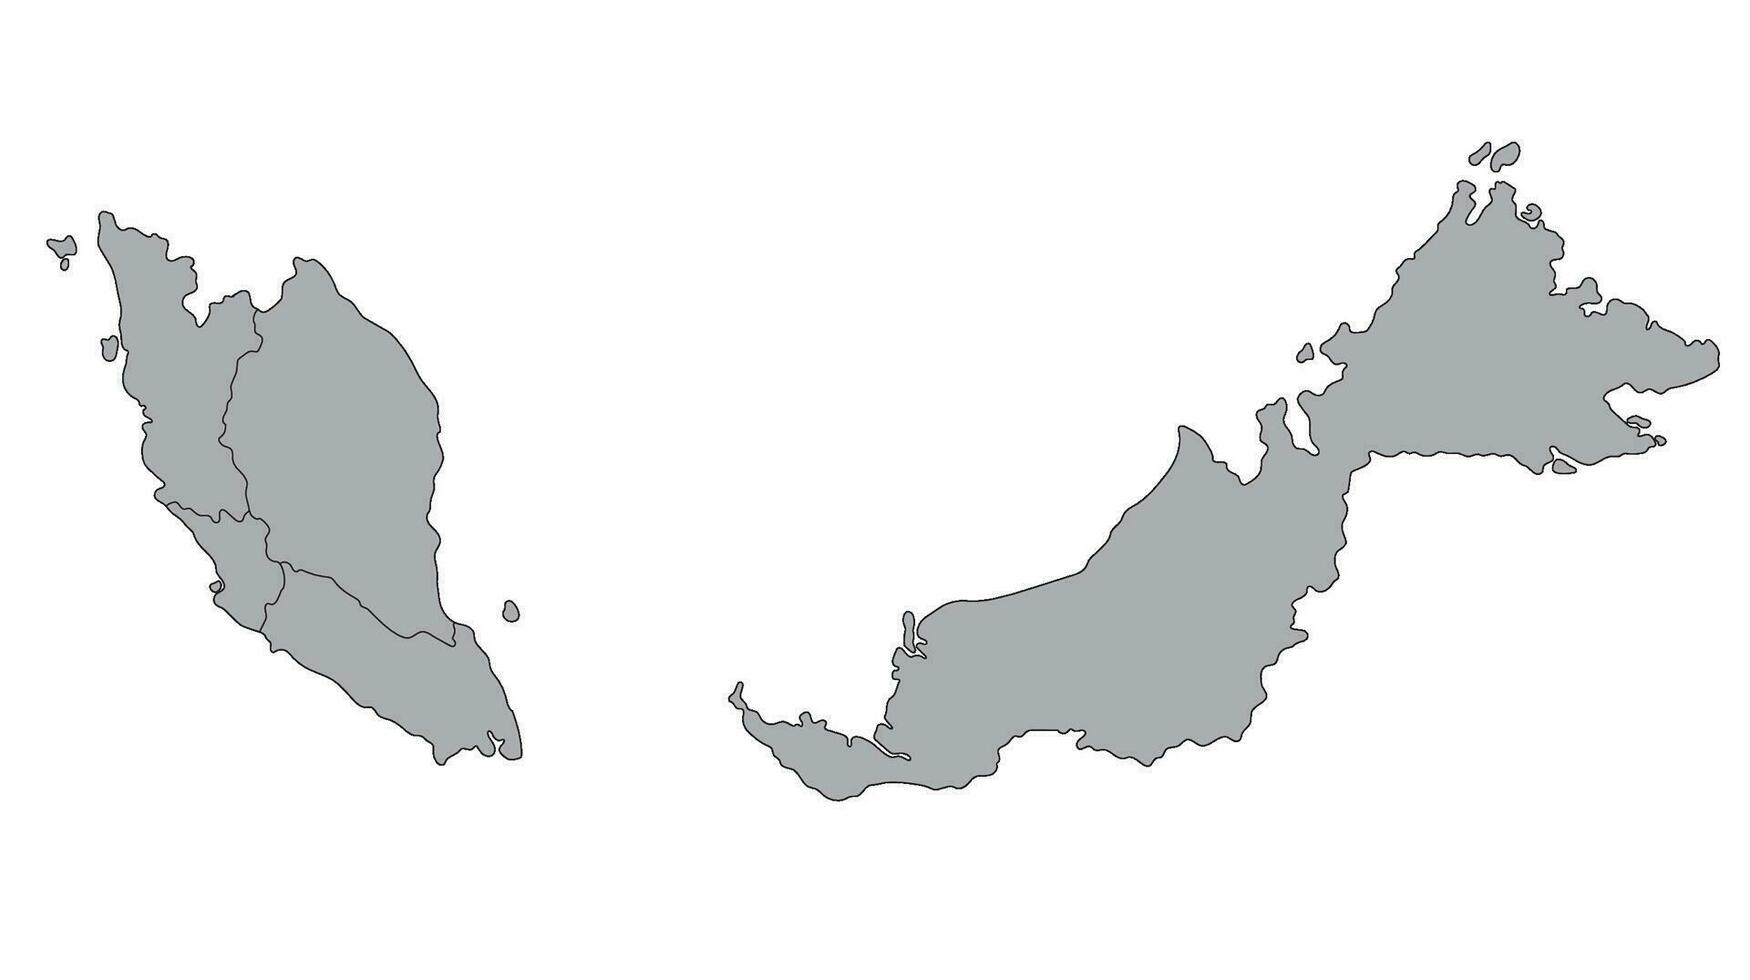 Malaysia map with main regions. Map of Malaysia vector